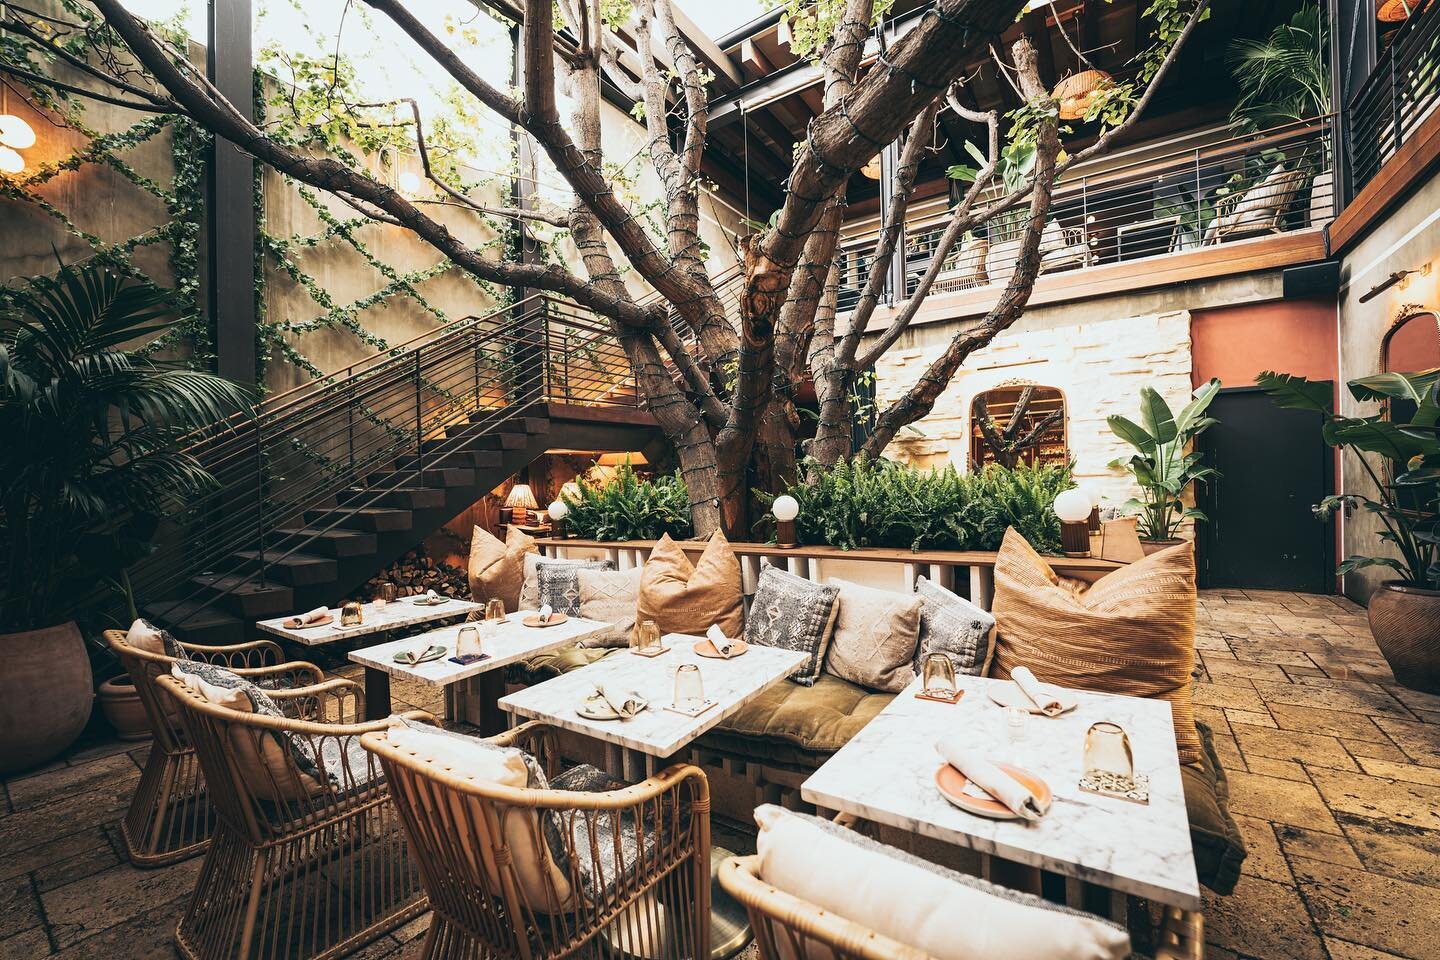 exterior patio of Mirate los angeles with bohemian decor, a tree, couch and tables